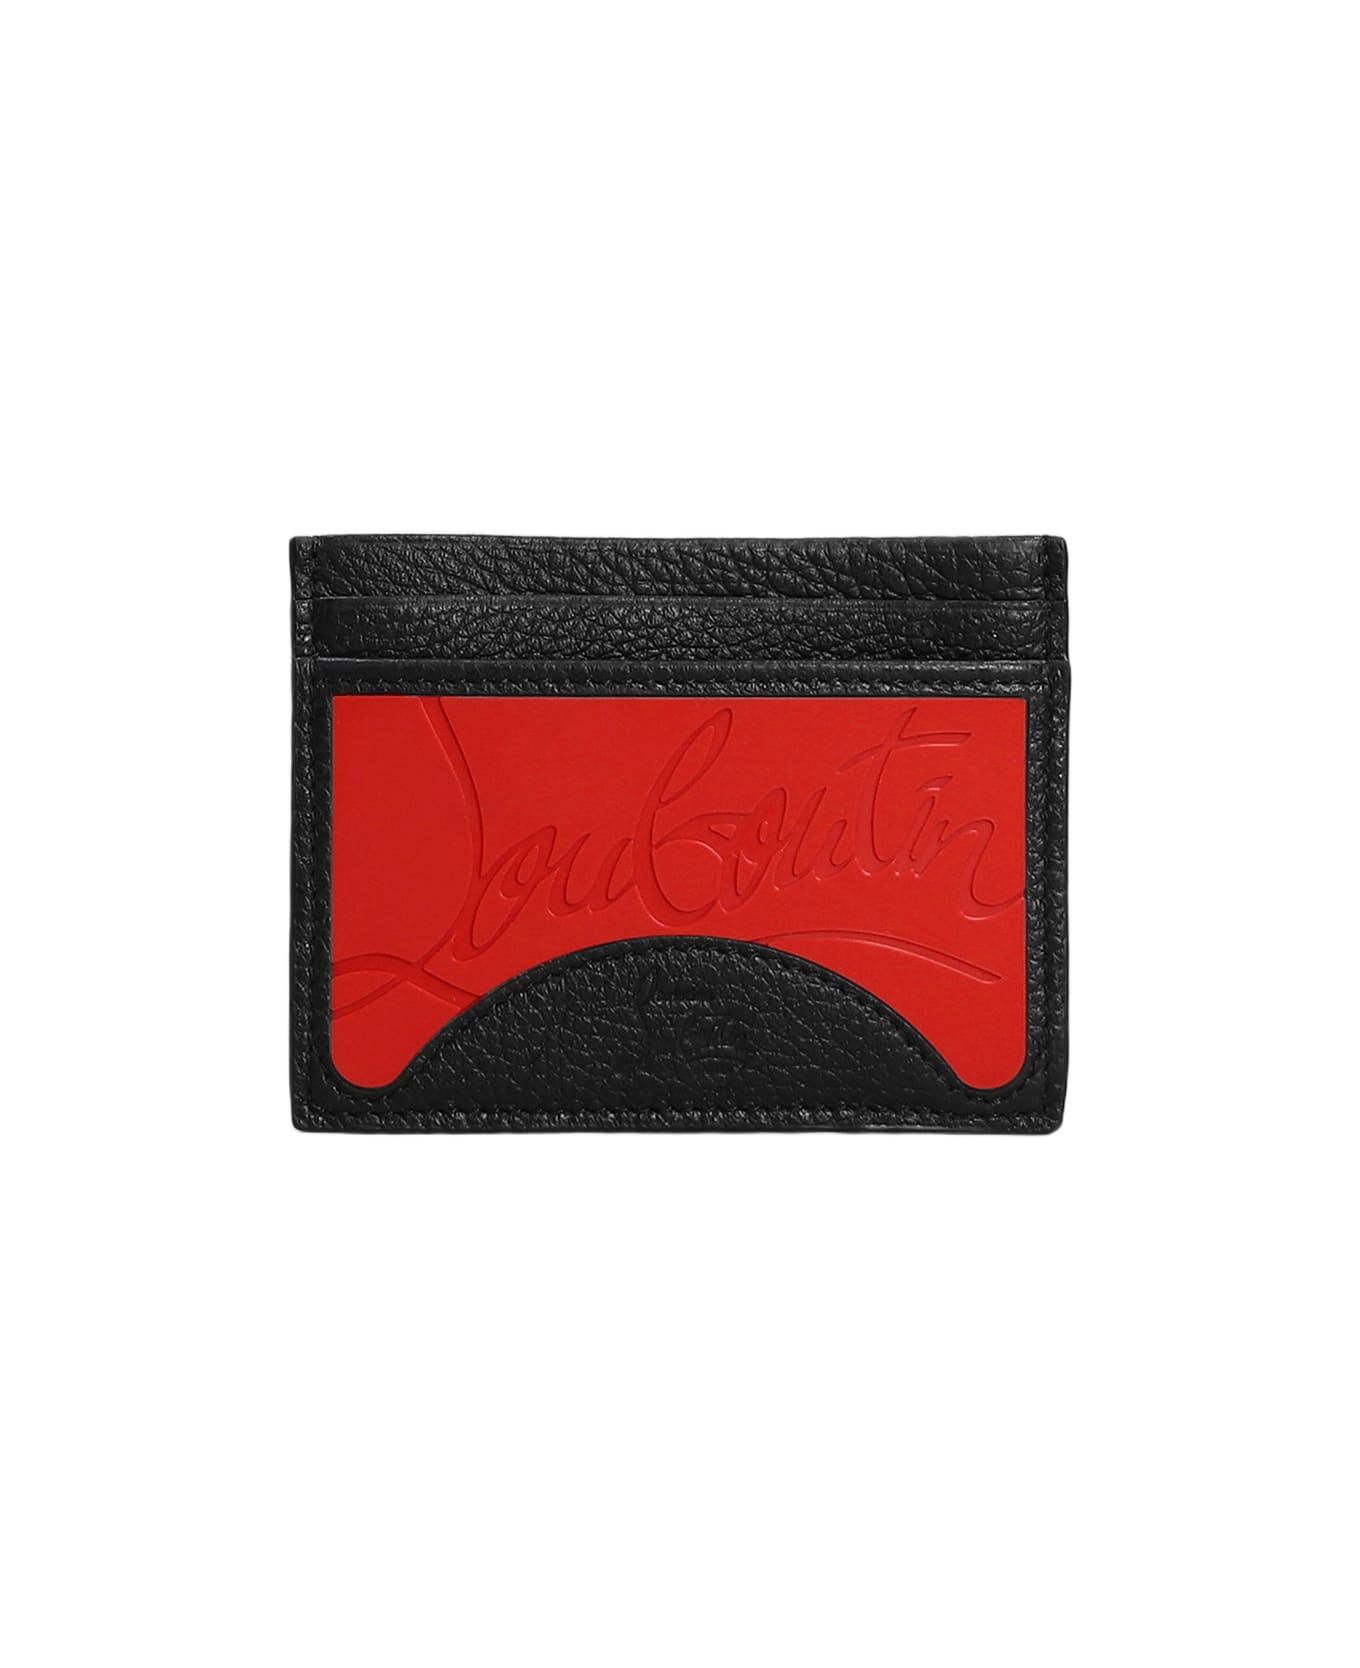 Wallet In Red Leather - 1